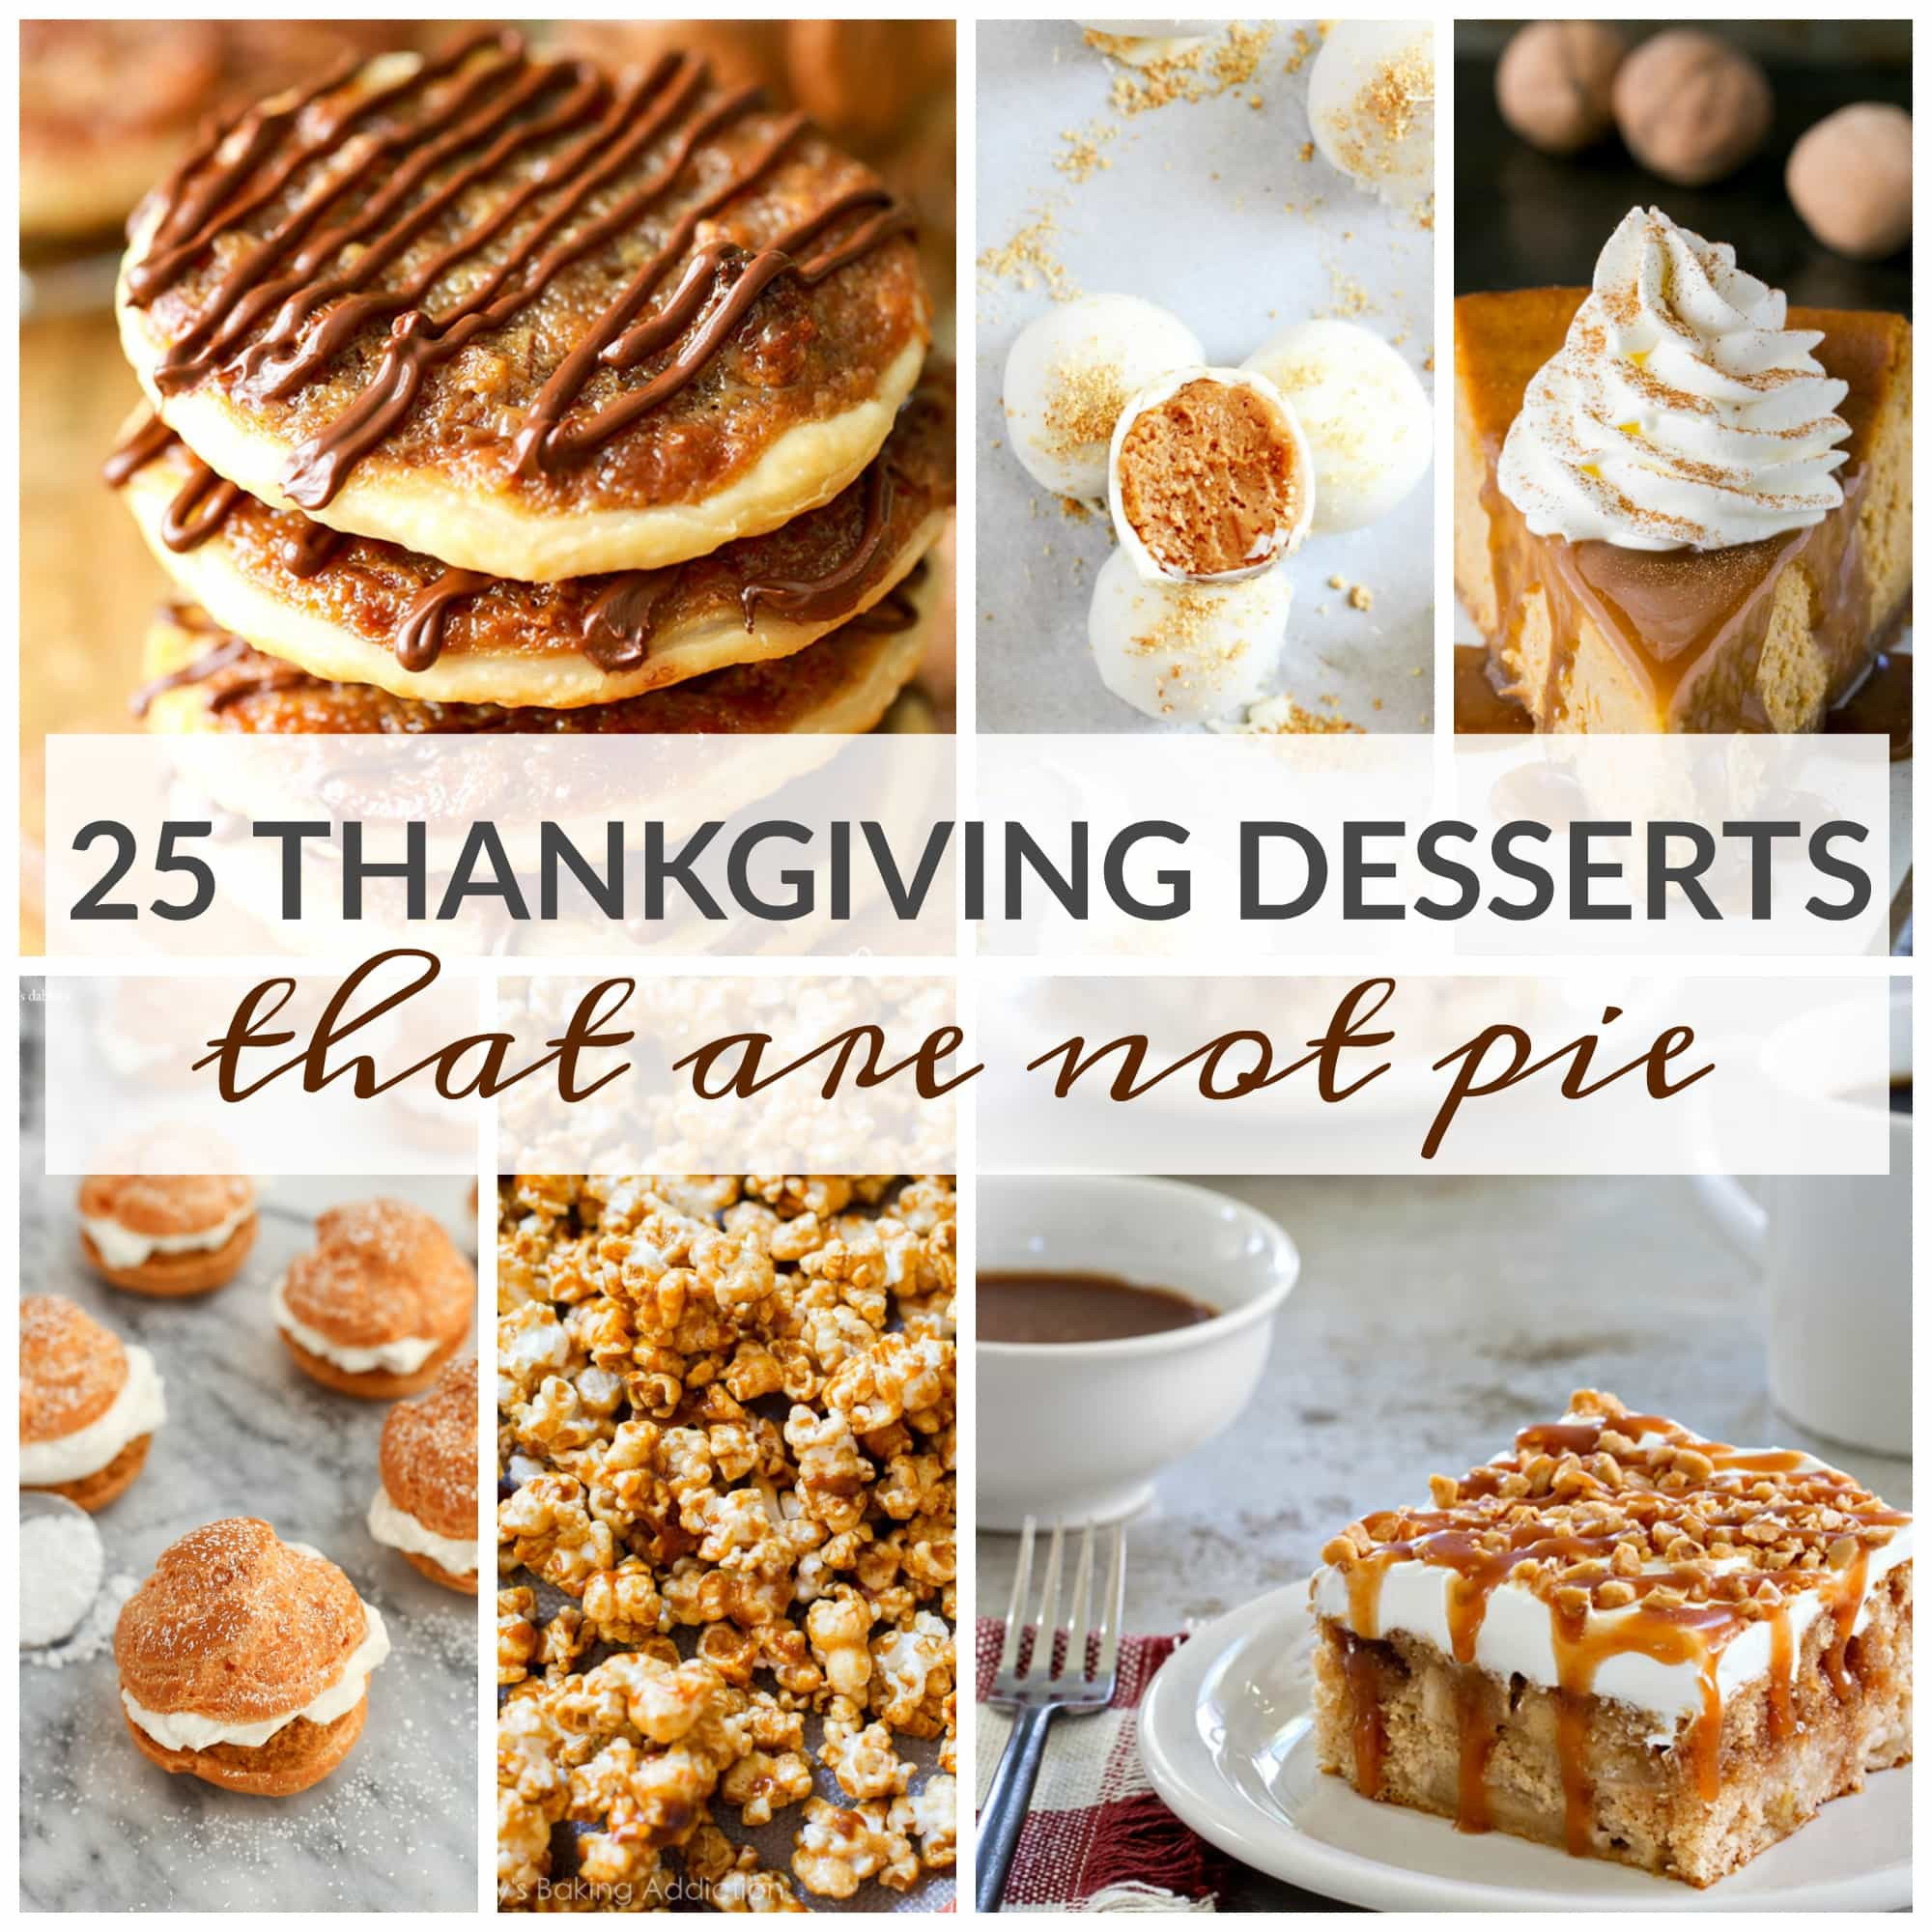 Pies For Thanksgiving
 25 Thanksgiving Desserts That Are Not Pie A Dash of Sanity